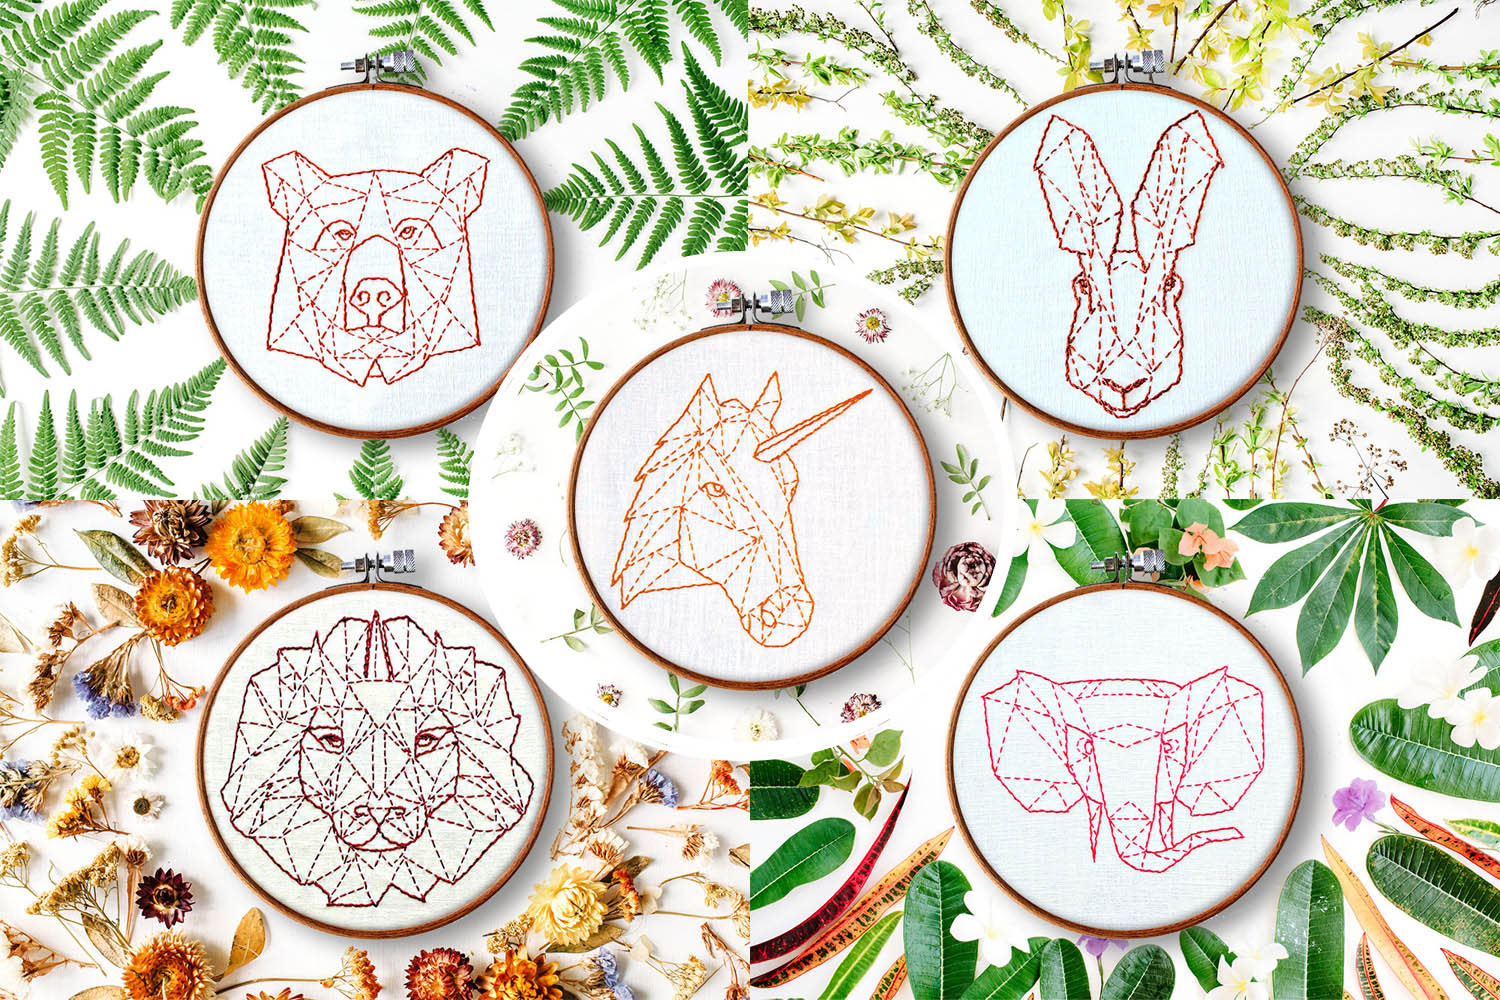 Hand Embroidery Pattern Modern Hand Embroidery Patterns Geometric Animals Beginner Embroidery Embroidery Ideas Contemporary Embroidery Rustic Home Decor